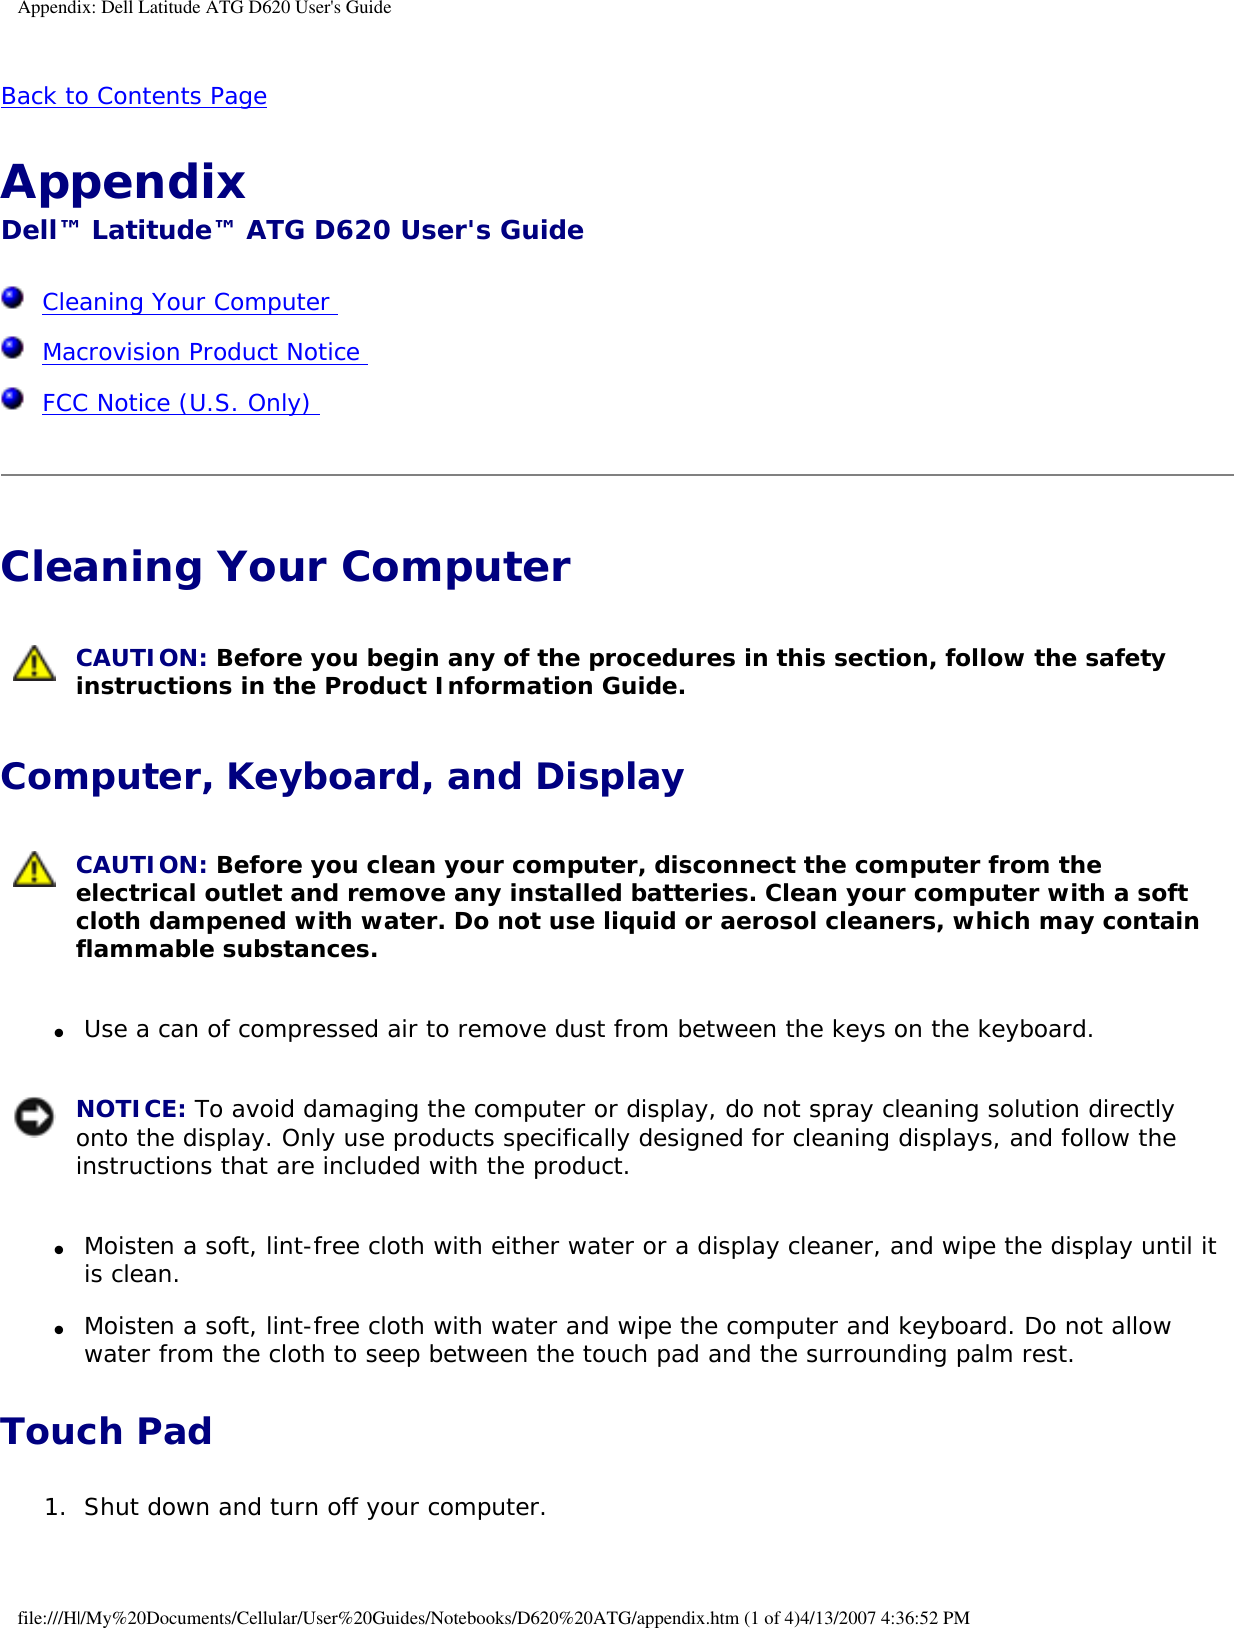 Appendix: Dell Latitude ATG D620 User&apos;s GuideBack to Contents Page Appendix Dell™ Latitude™ ATG D620 User&apos;s Guide  Cleaning Your Computer   Macrovision Product Notice   FCC Notice (U.S. Only)  Cleaning Your Computer  CAUTION: Before you begin any of the procedures in this section, follow the safety instructions in the Product Information Guide. Computer, Keyboard, and Display CAUTION: Before you clean your computer, disconnect the computer from the electrical outlet and remove any installed batteries. Clean your computer with a soft cloth dampened with water. Do not use liquid or aerosol cleaners, which may contain flammable substances. ●     Use a can of compressed air to remove dust from between the keys on the keyboard.   NOTICE: To avoid damaging the computer or display, do not spray cleaning solution directly onto the display. Only use products specifically designed for cleaning displays, and follow the instructions that are included with the product. ●     Moisten a soft, lint-free cloth with either water or a display cleaner, and wipe the display until it is clean.  ●     Moisten a soft, lint-free cloth with water and wipe the computer and keyboard. Do not allow water from the cloth to seep between the touch pad and the surrounding palm rest.  Touch Pad1.  Shut down and turn off your computer.   file:///H|/My%20Documents/Cellular/User%20Guides/Notebooks/D620%20ATG/appendix.htm (1 of 4)4/13/2007 4:36:52 PM